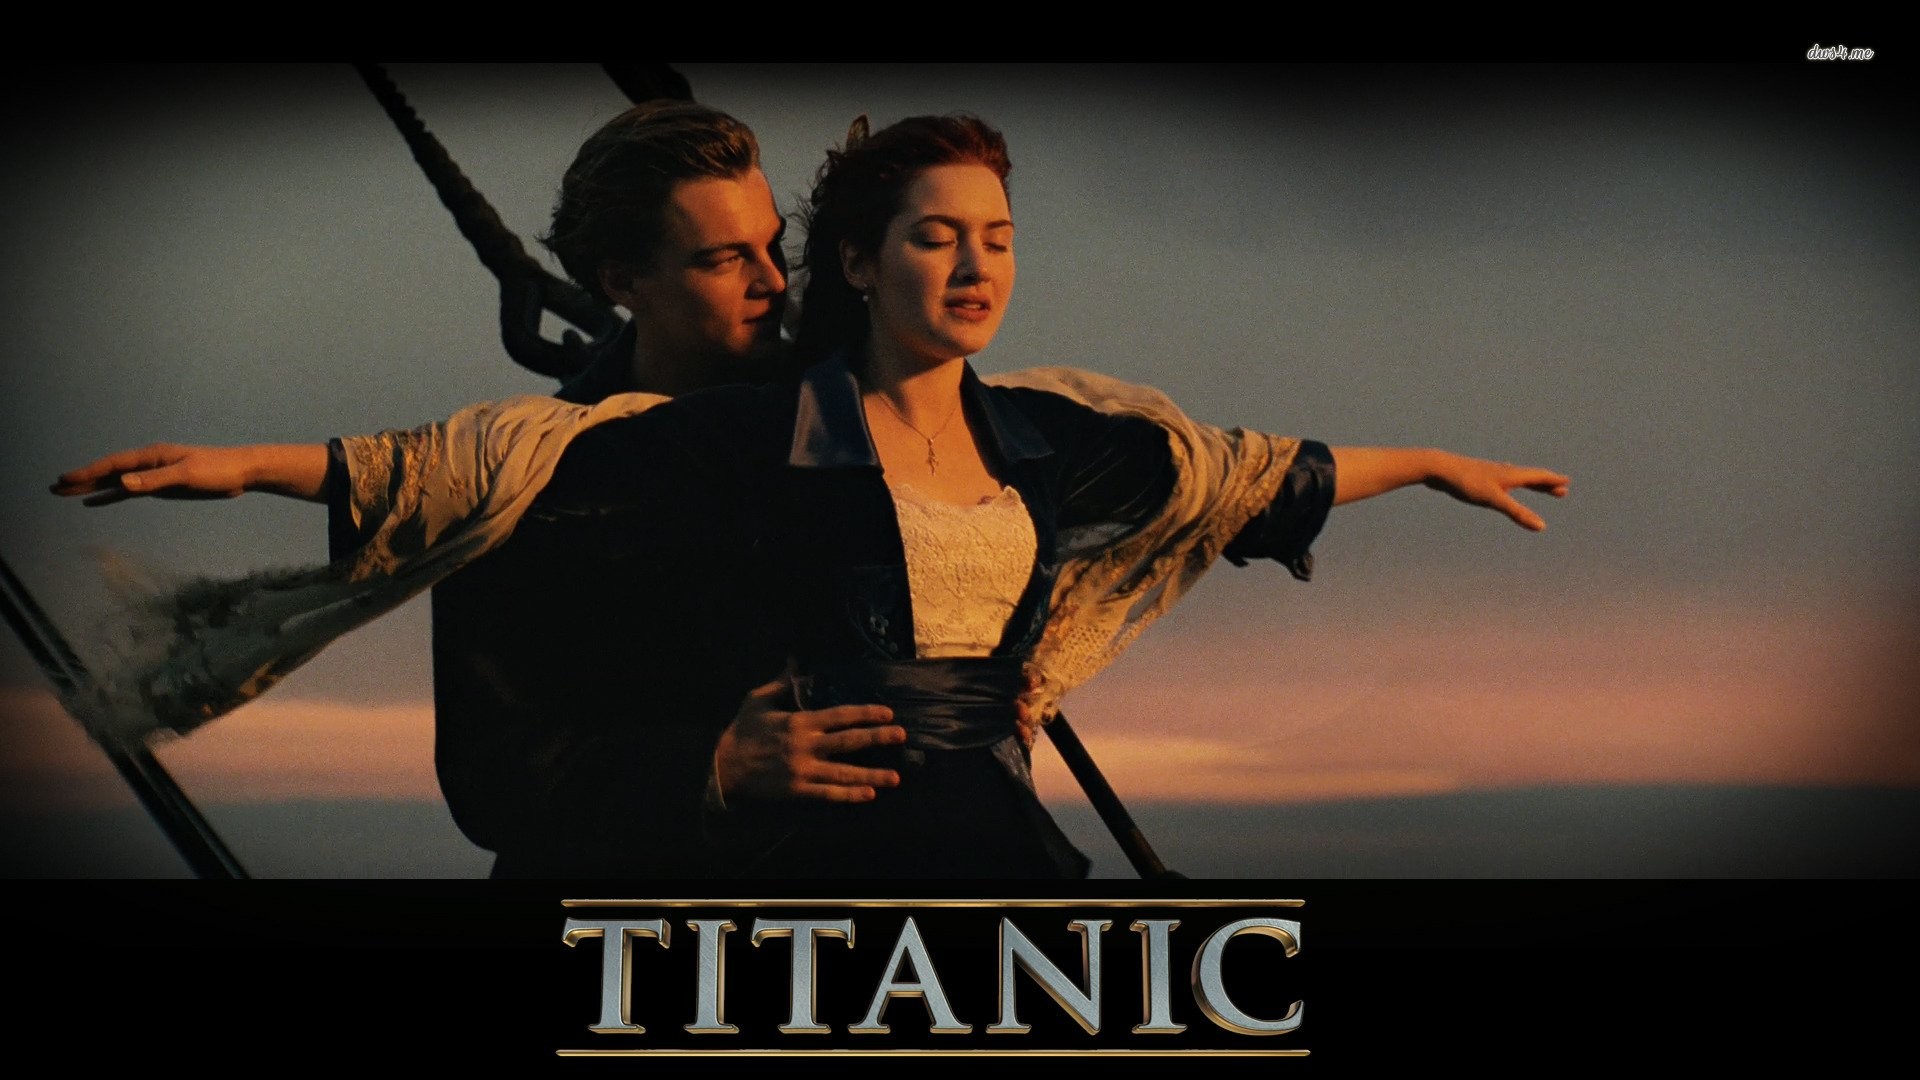 1920x1080 Titanic 439253. SHARE. TAGS: Kate Winslet ...